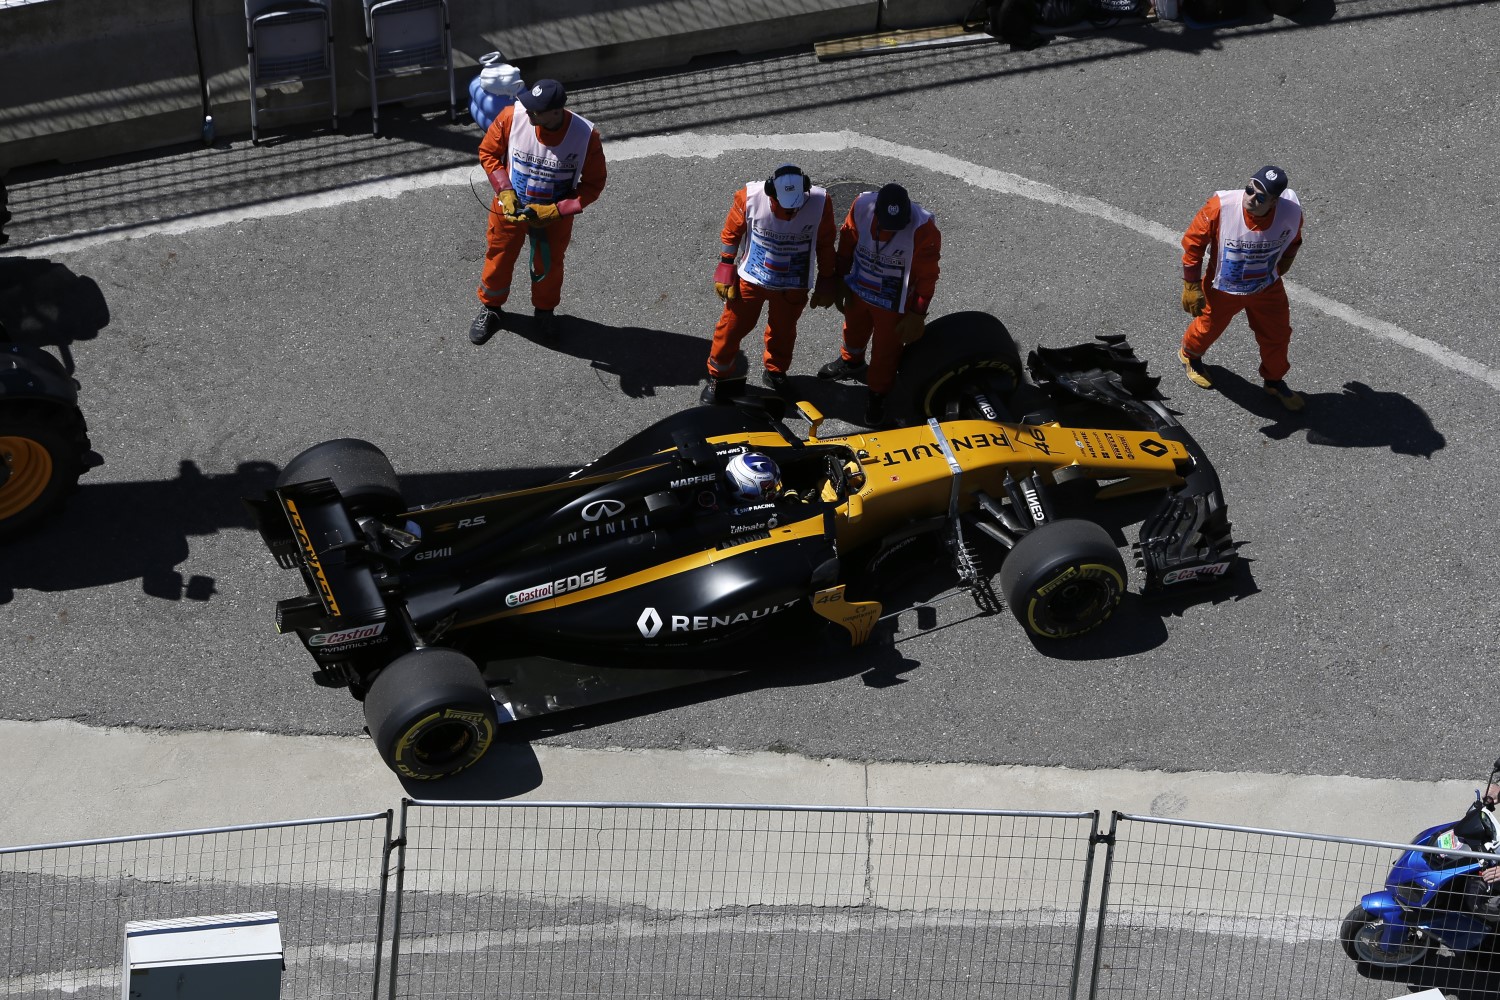 Sergey Sirotkin's check for the Russian practice won't be cashed until Spain now